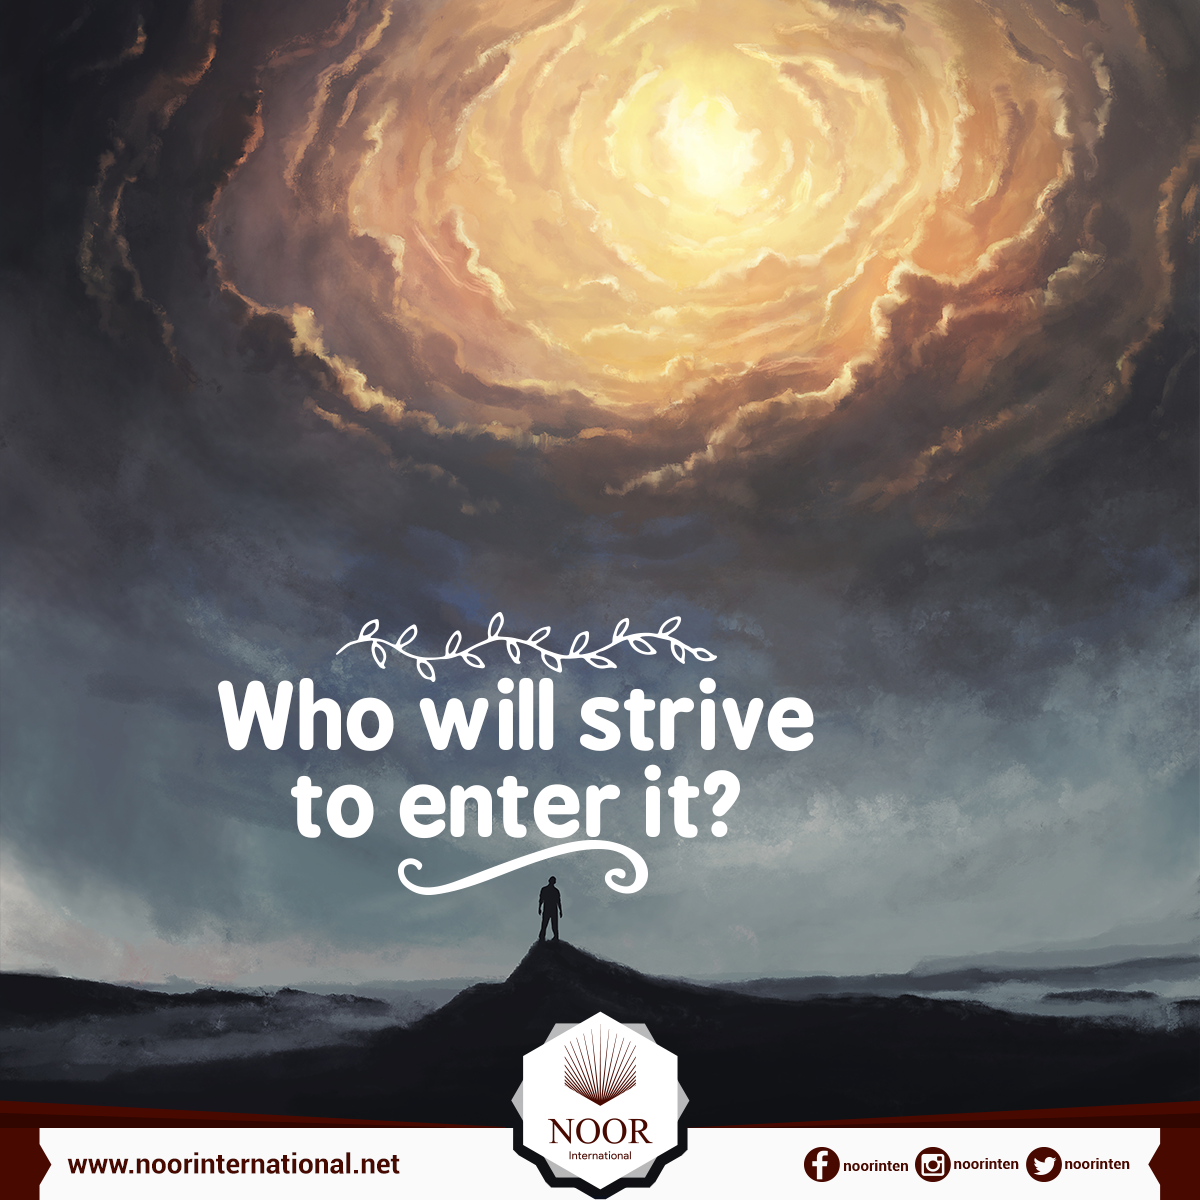 Who will strive to enter it?